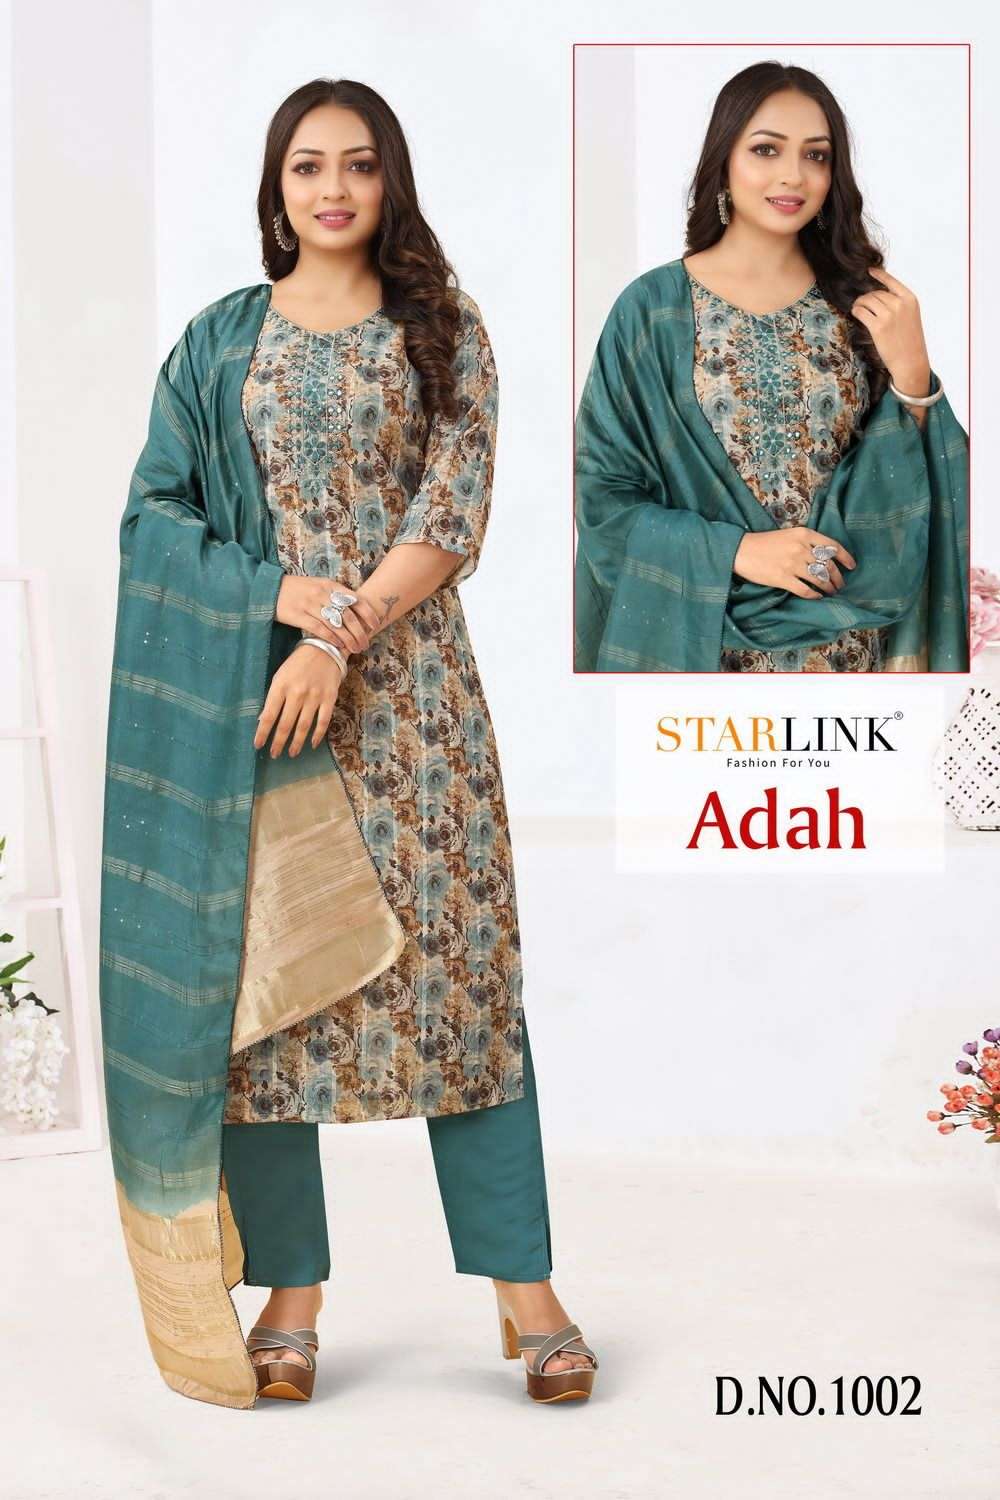 Starlink  Adah Formal Wear Style Readymade Salwar Suit Collection